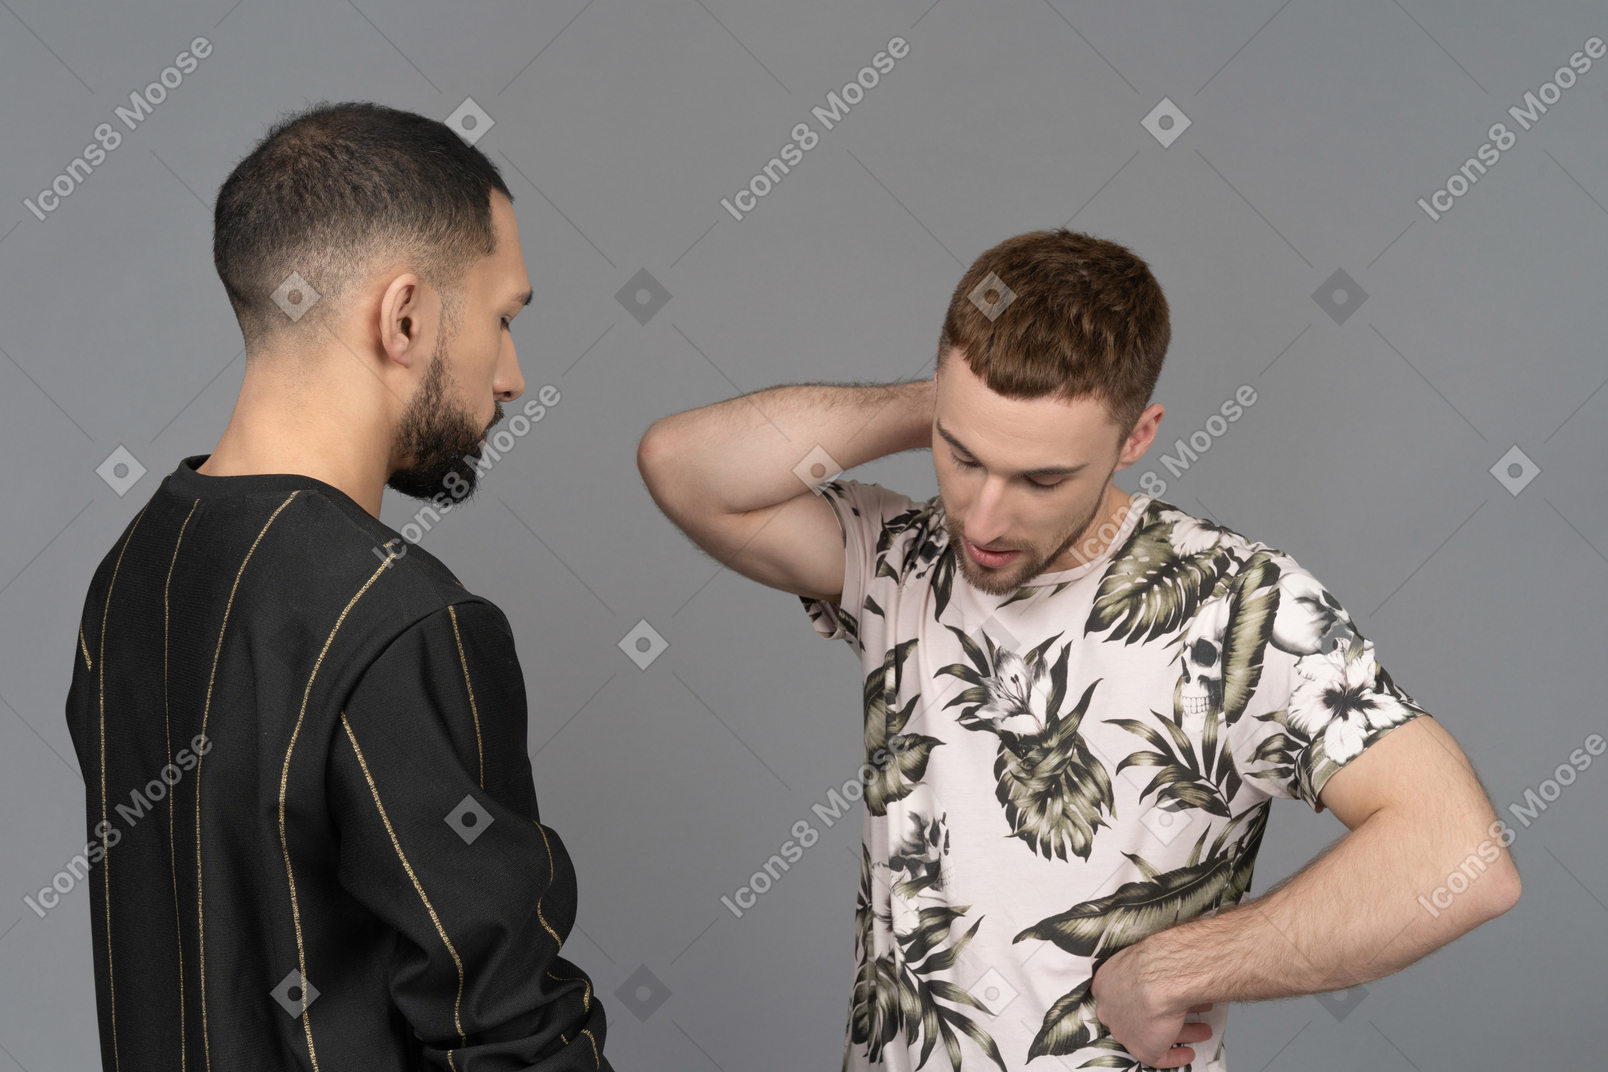 Couple of two young caucasian men looking troubled and stressed as if they're arguing